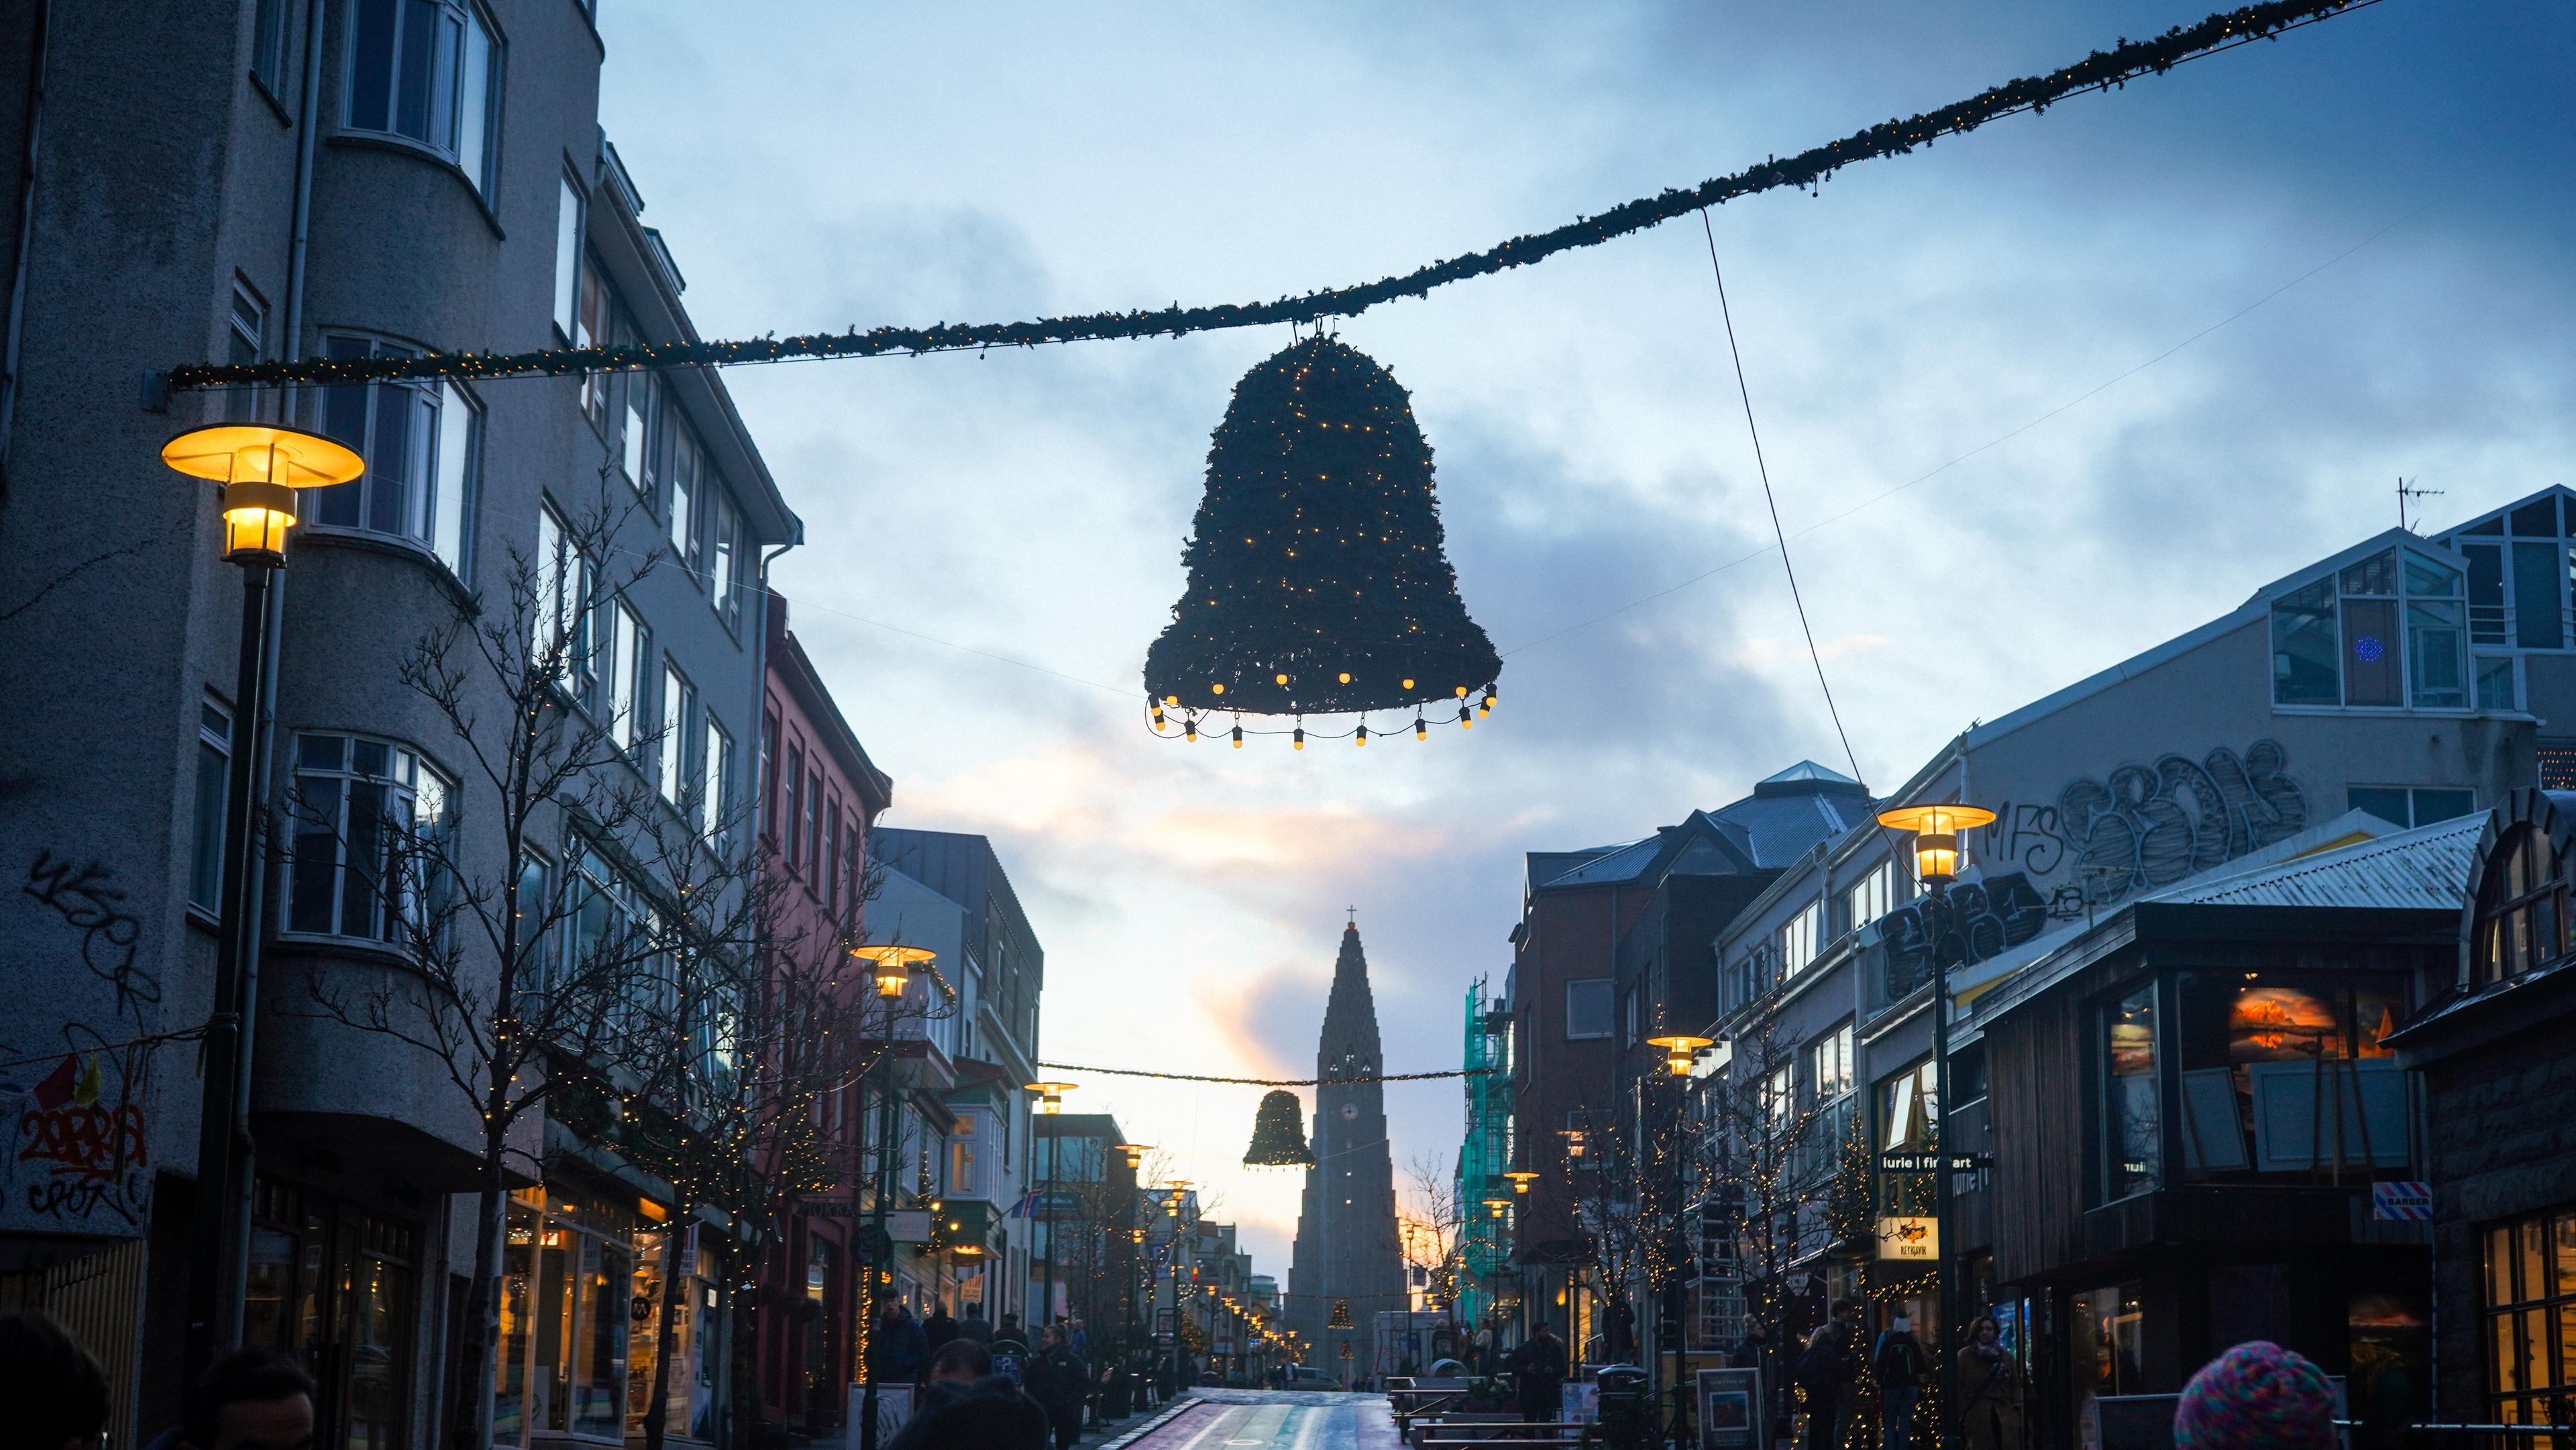 A picturesque view of a bustling street at dusk with buildings on either side, festive lights strung across the street, and a large Christmas tree-shaped light decoration hanging above